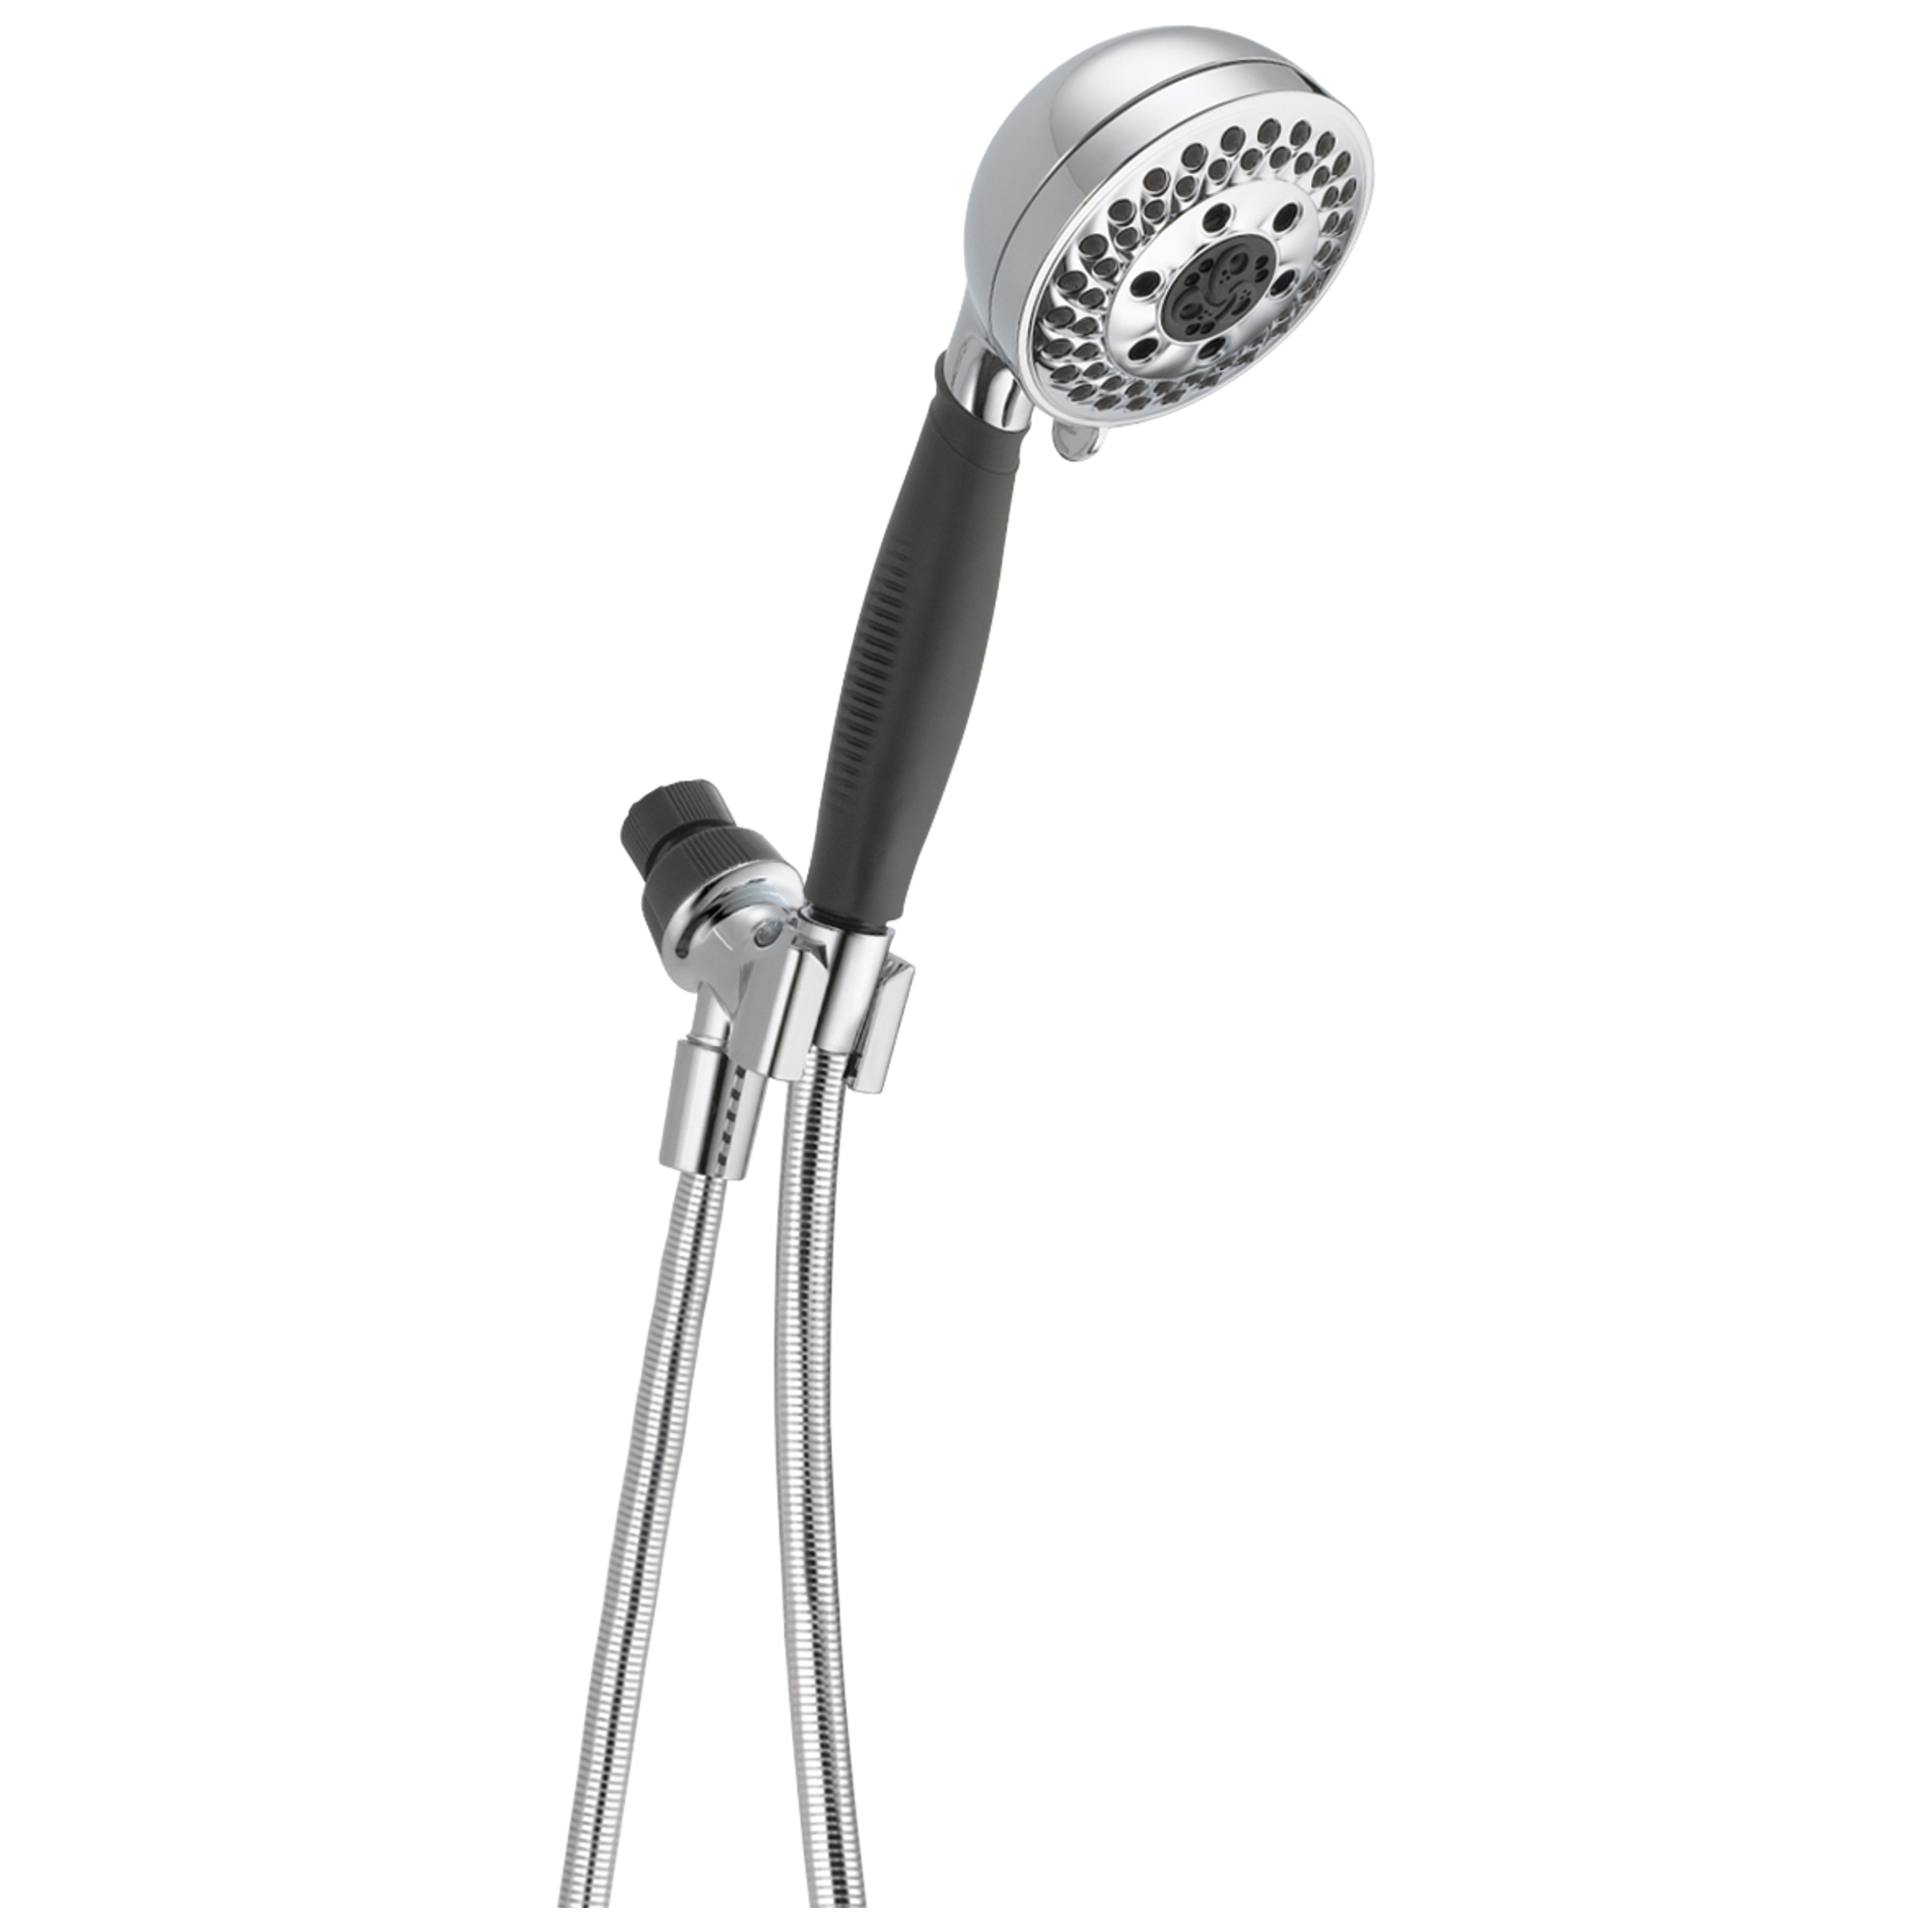 Home Expressions ABS Chrome 5 Function Handheld Shower Head DIA 4.7 Home Expressions Inc.